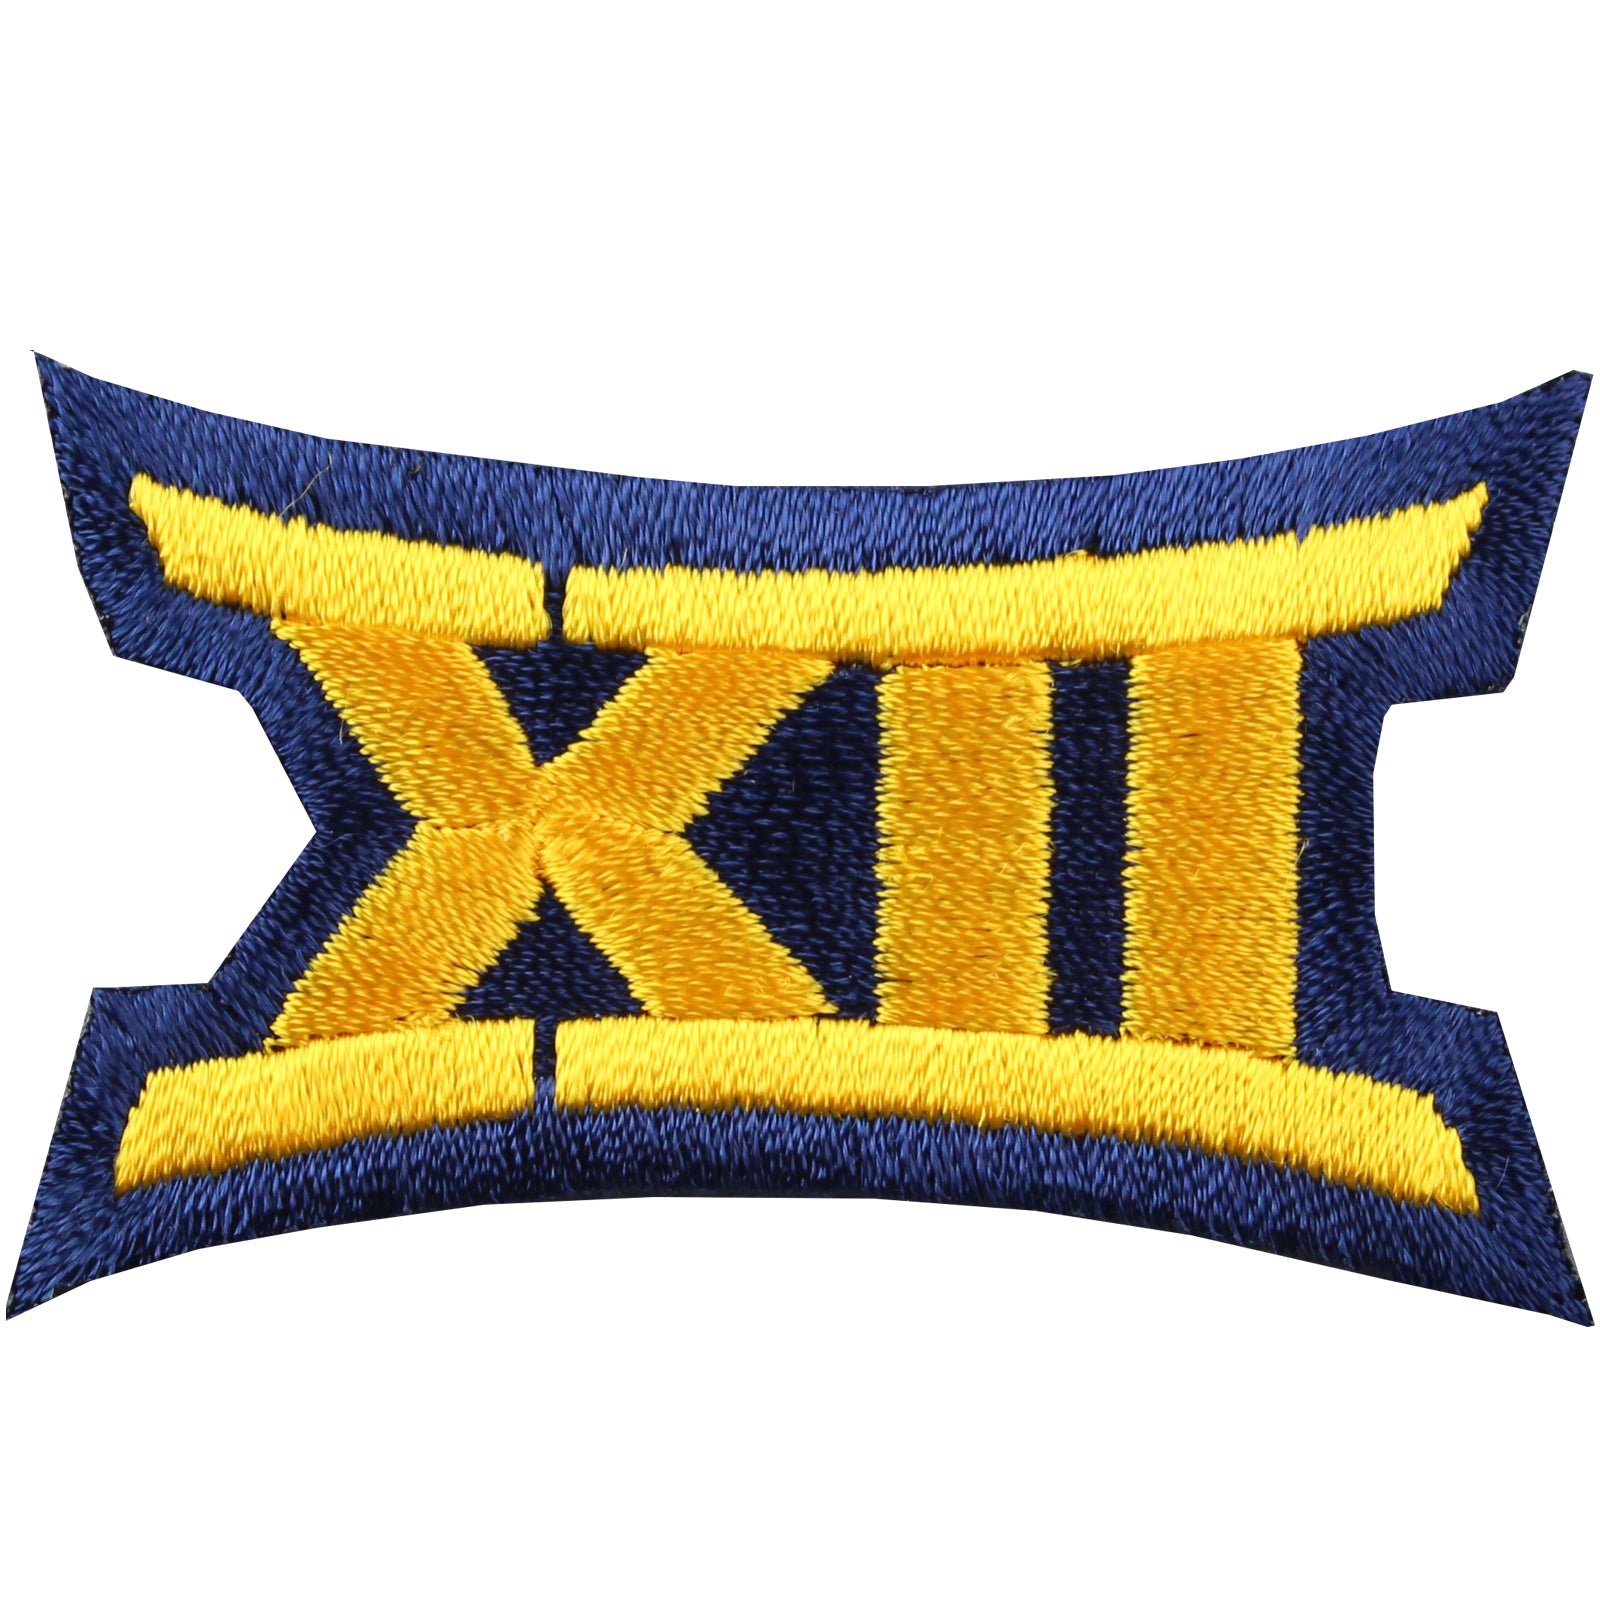 Big 12 XII Conference Team Jersey Uniform Patch West Virginia Mountaineers 